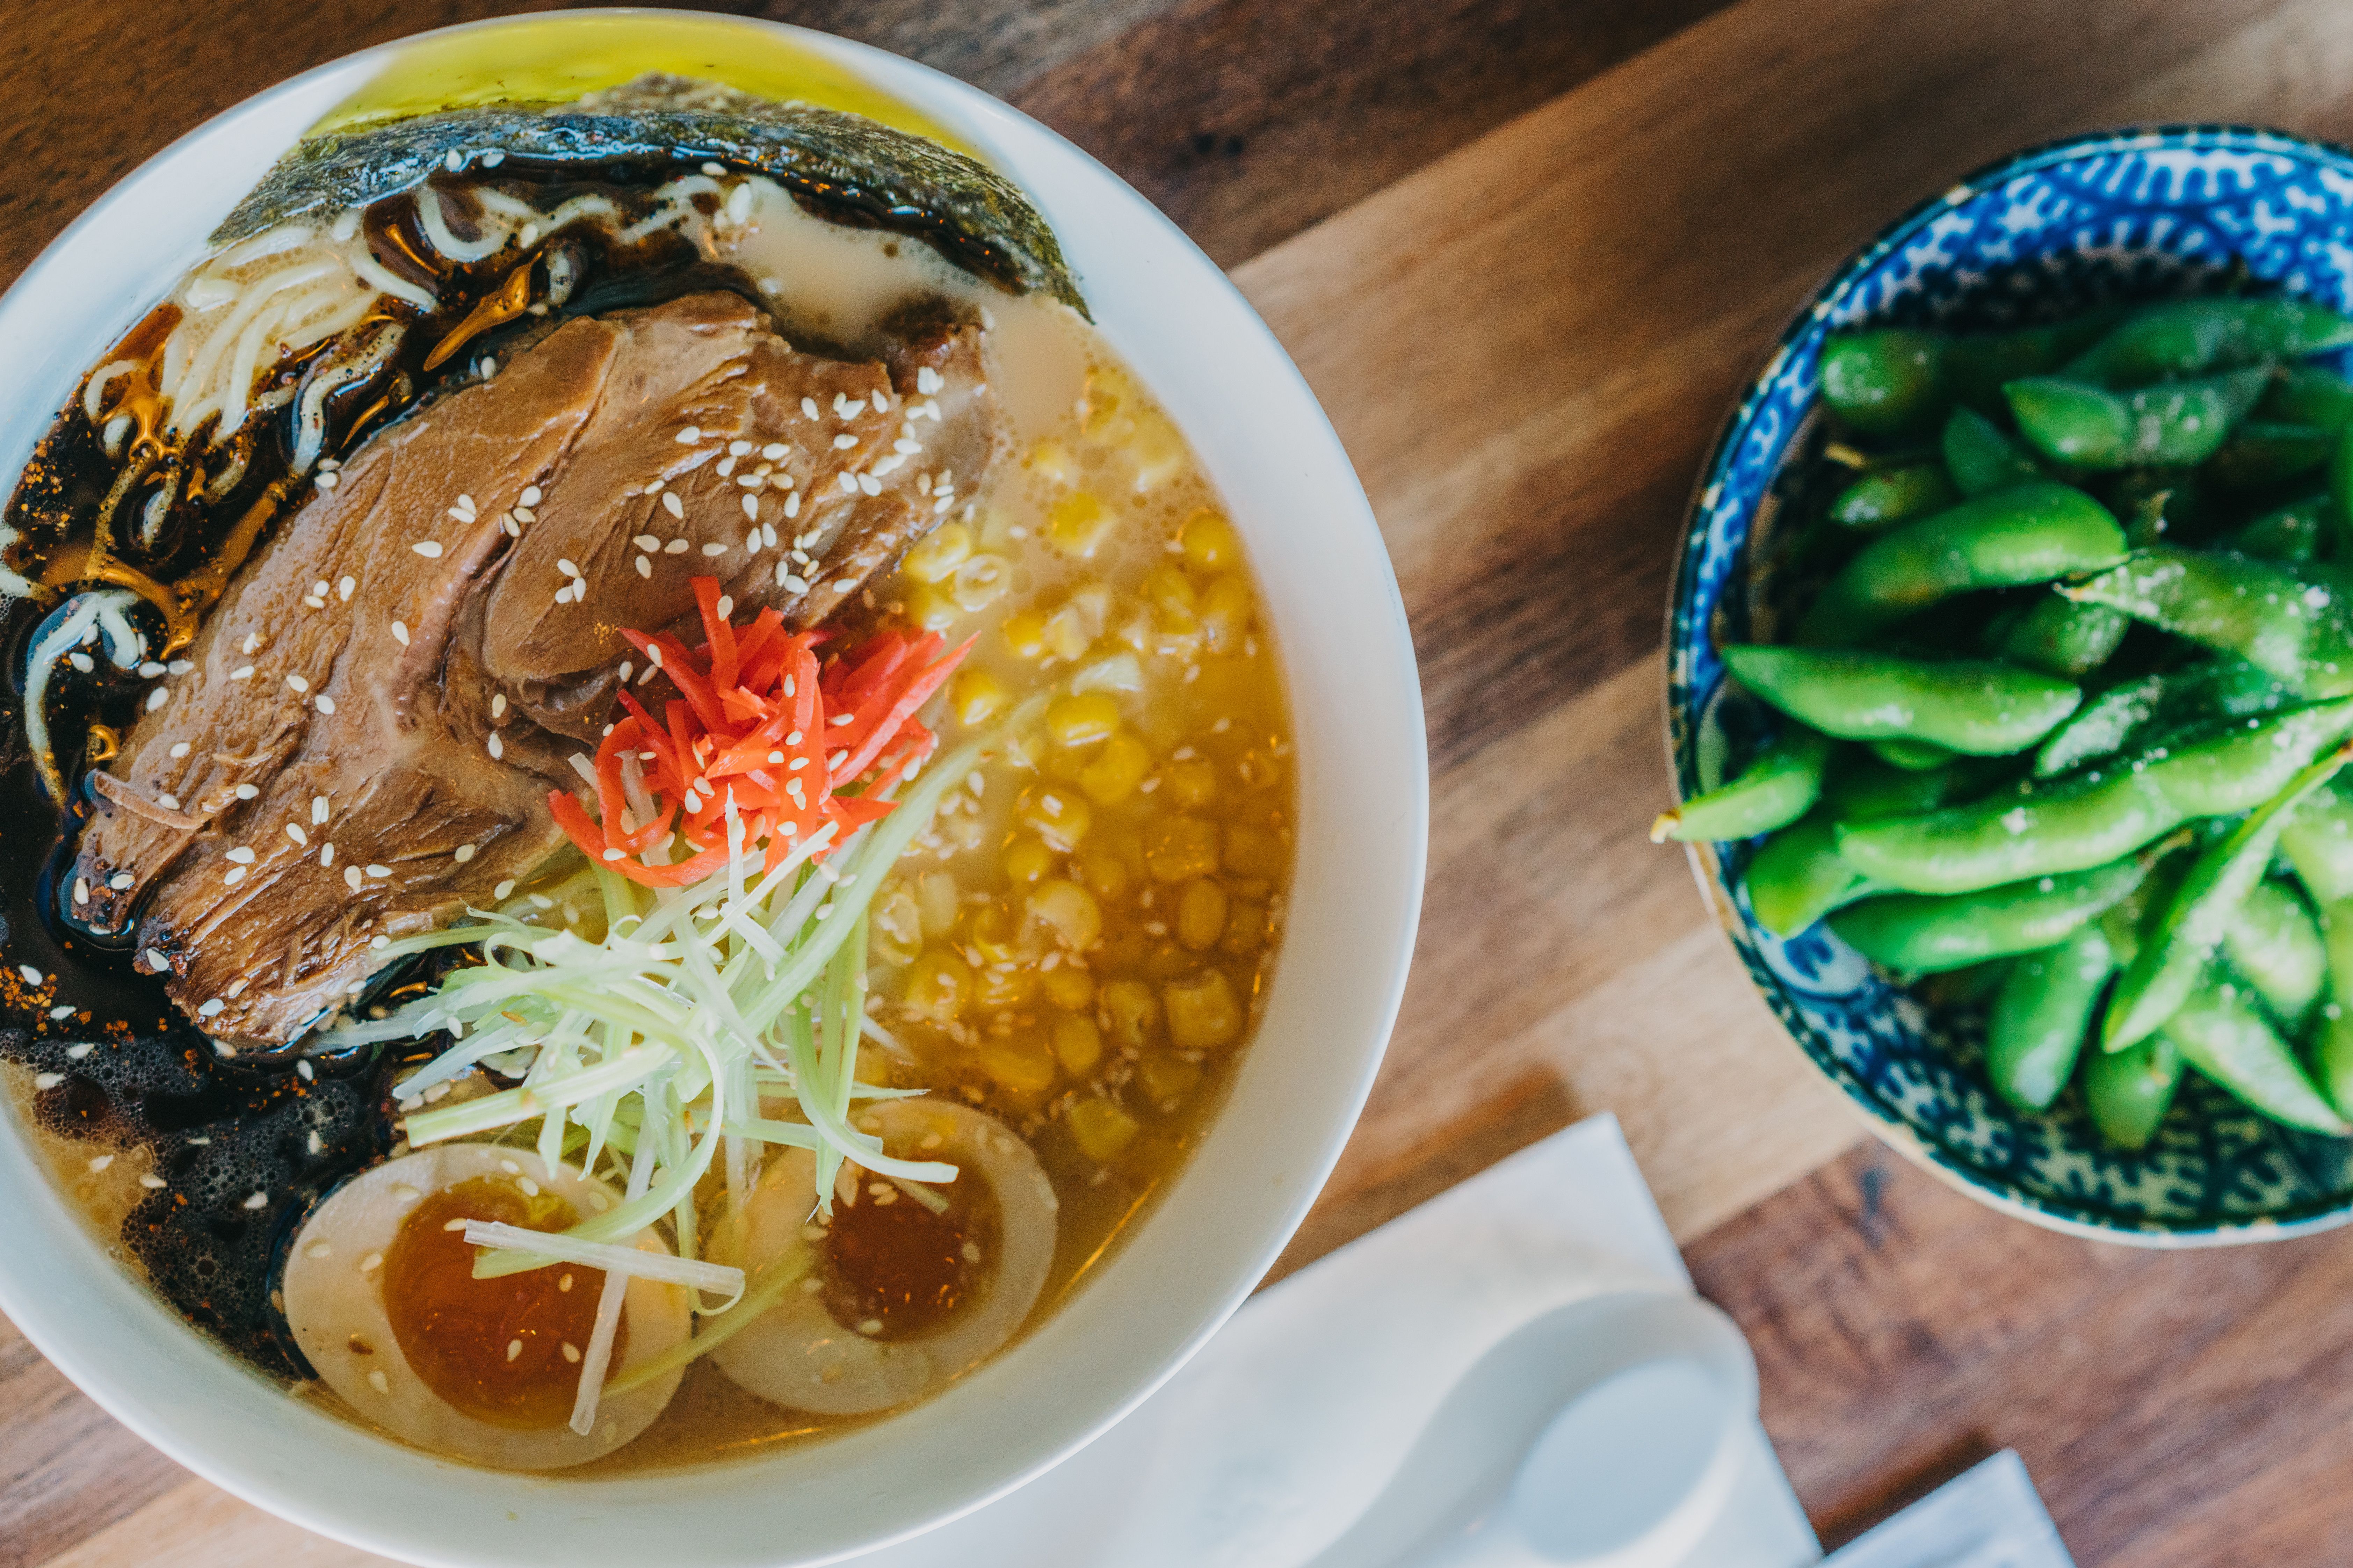 Photo shows a bowl of ramen and edamame